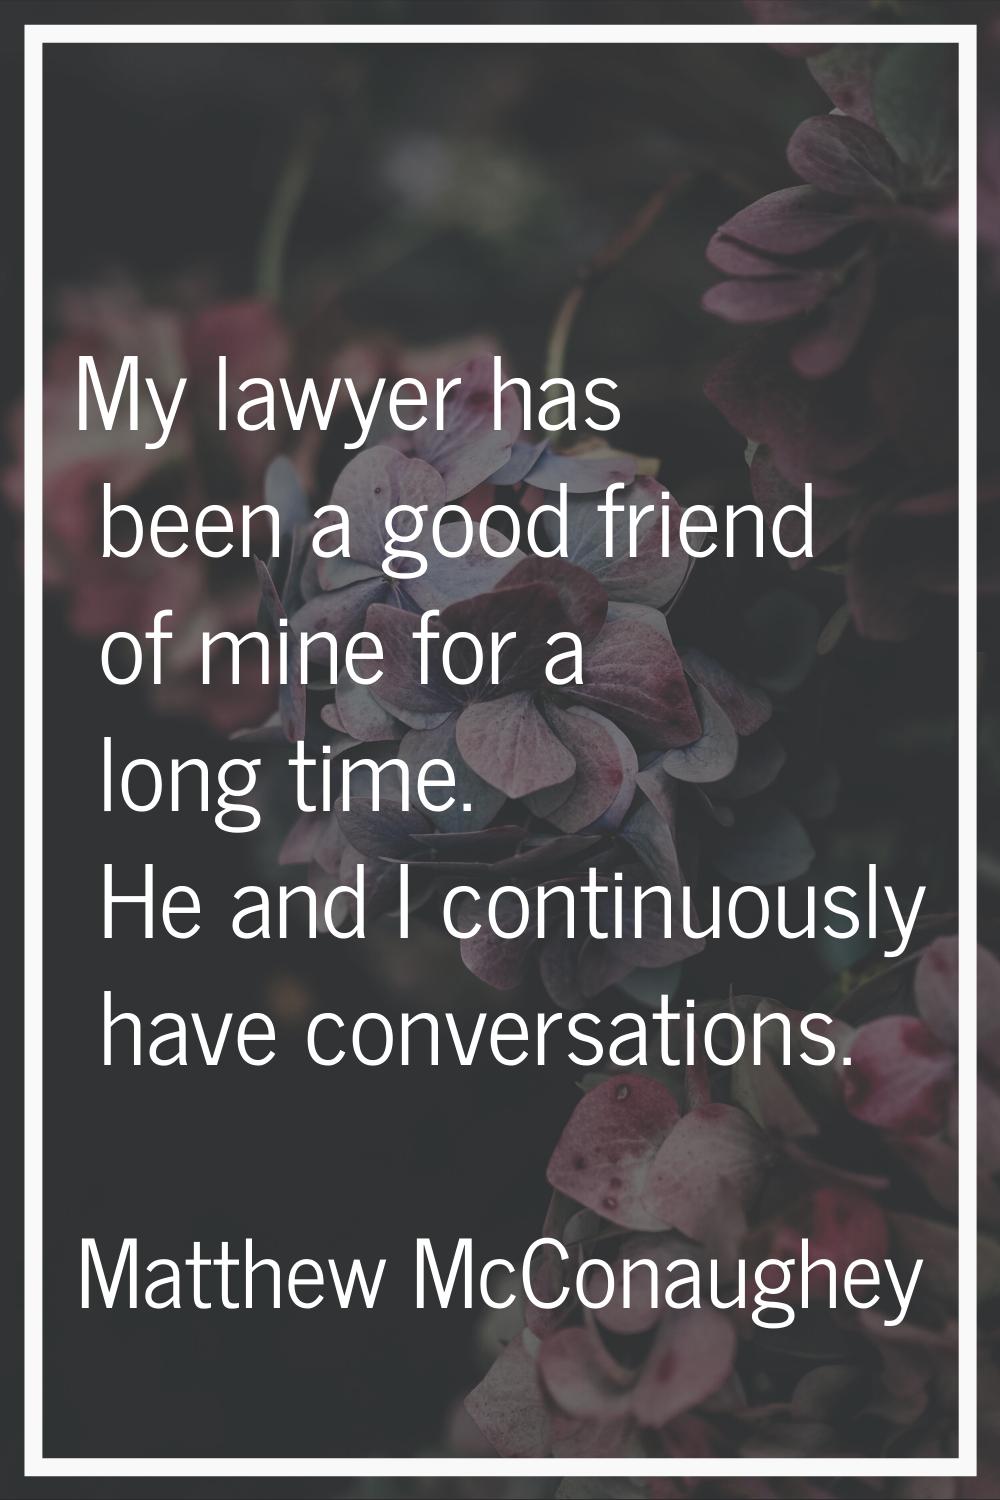 My lawyer has been a good friend of mine for a long time. He and I continuously have conversations.